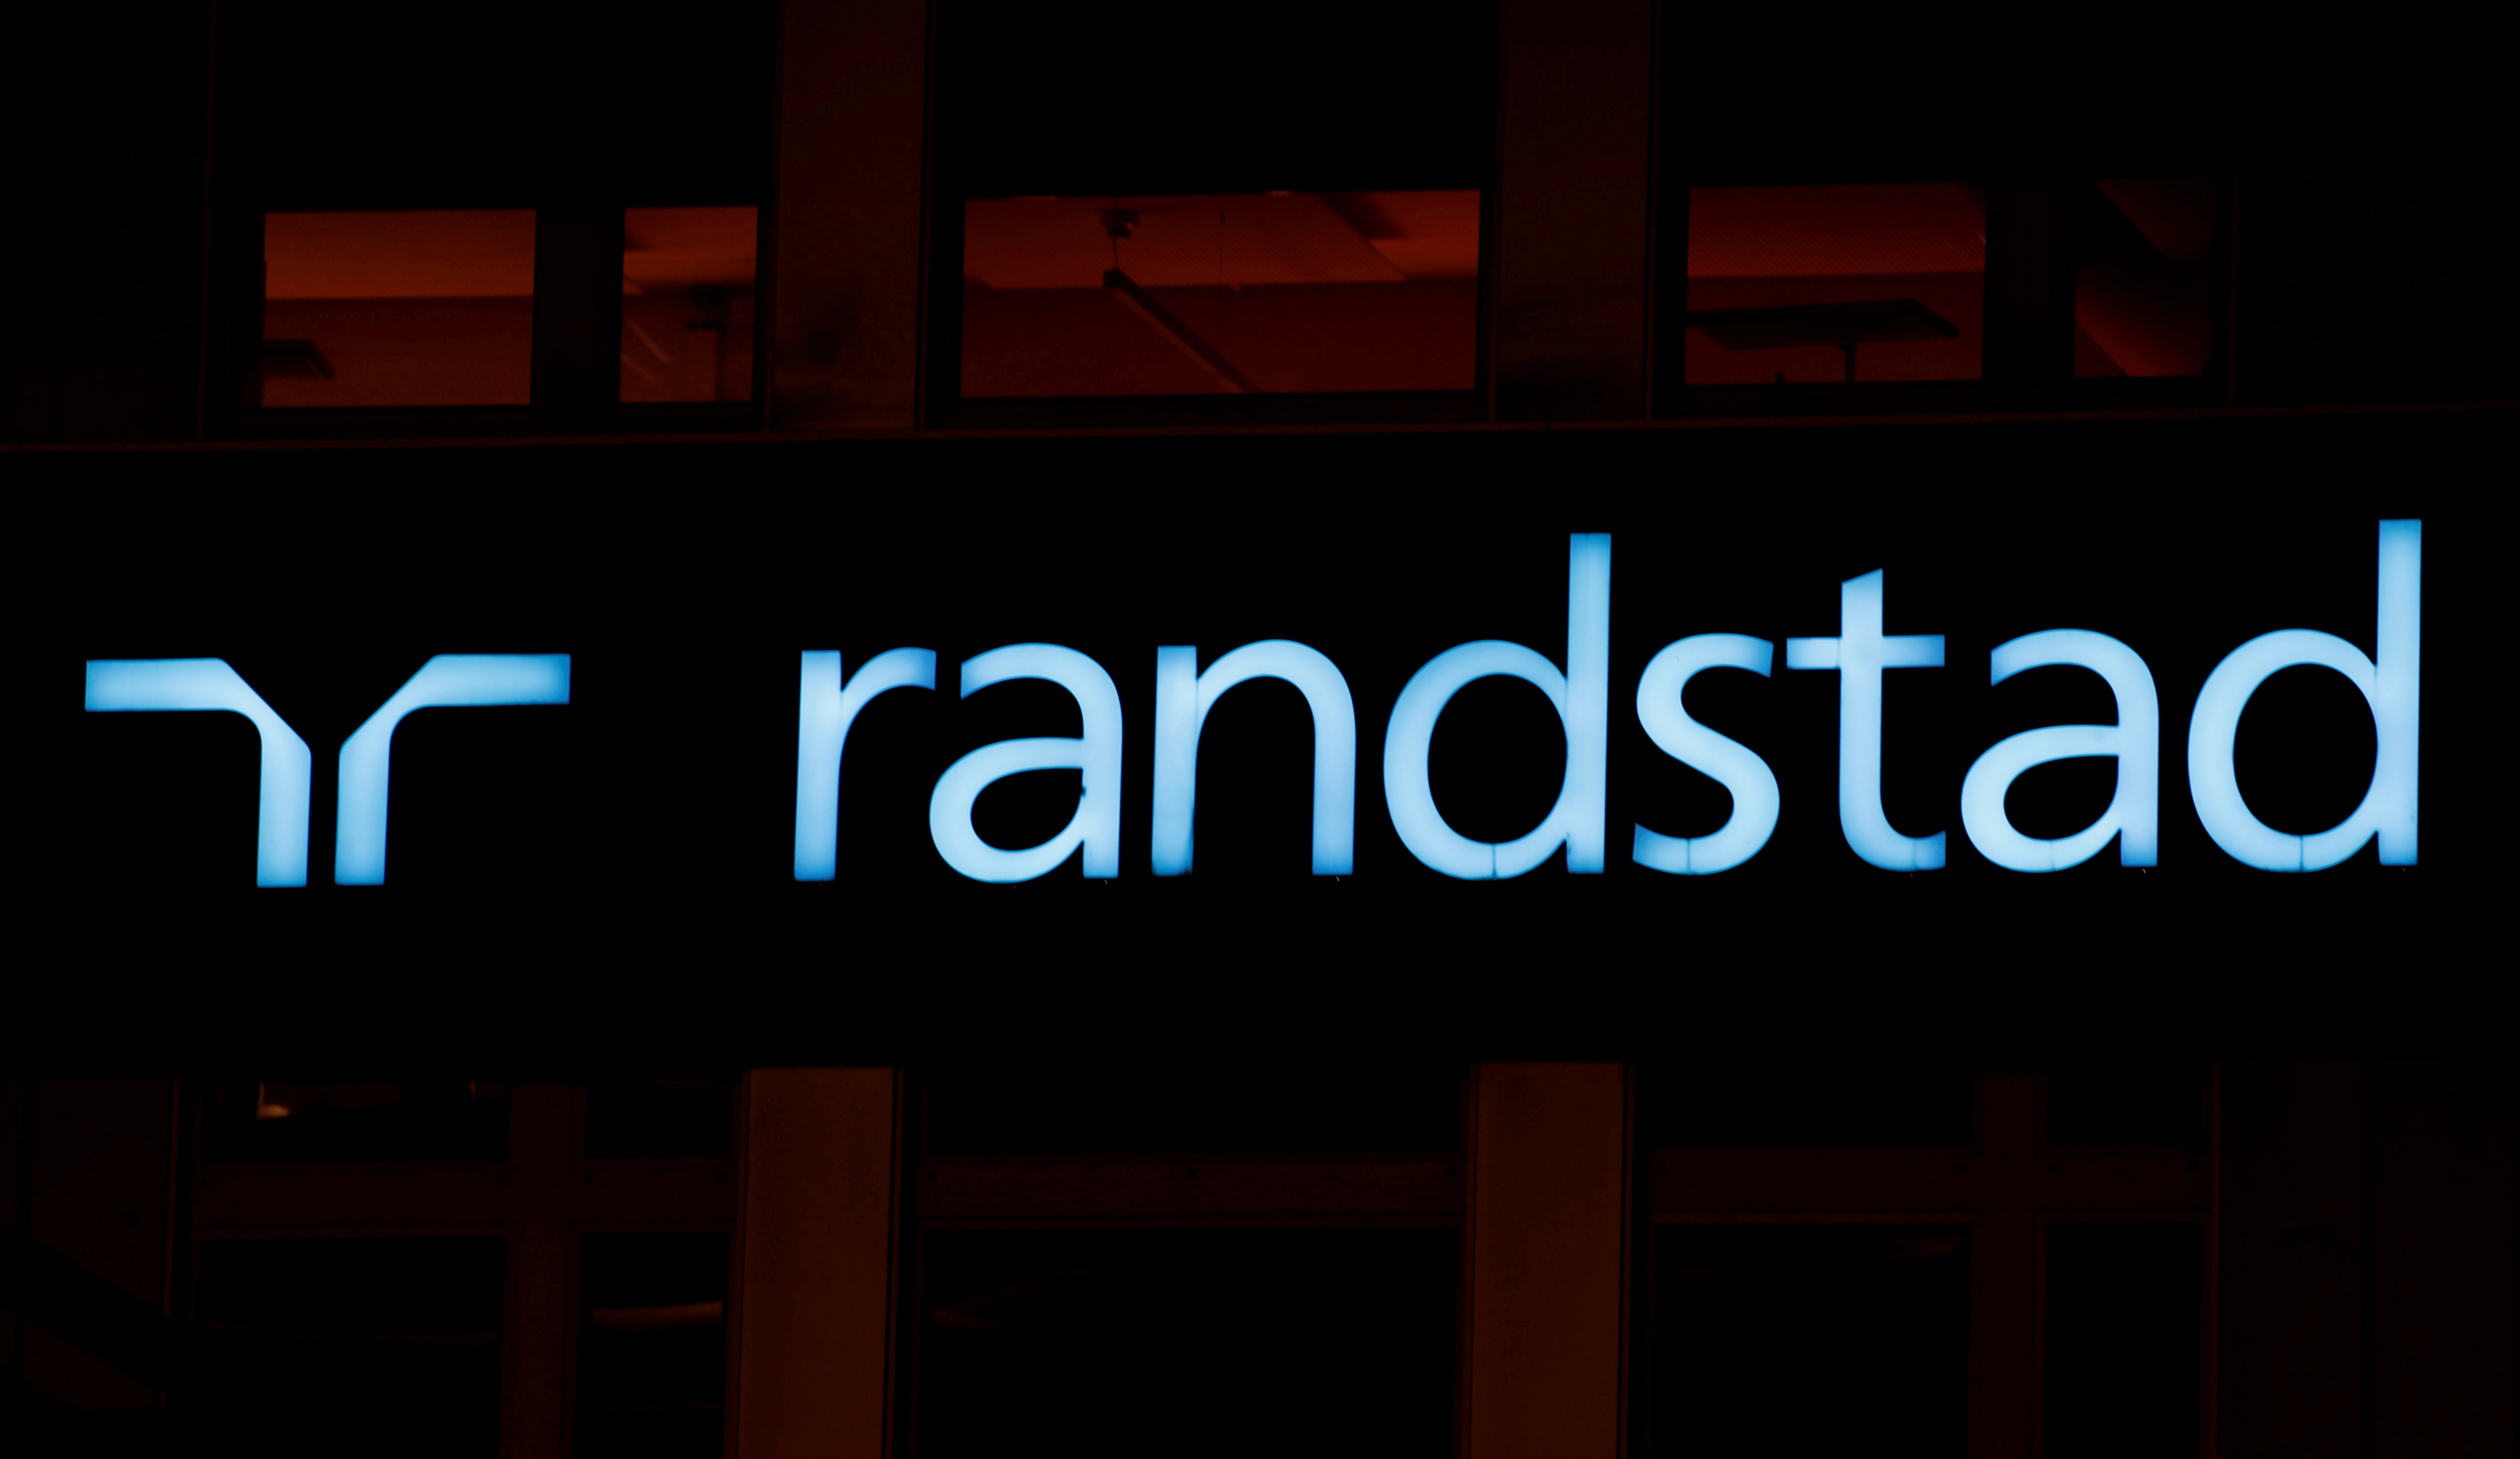 The logo of personnel service provider Randstad is seen at an office building in Zurich, Switzerland October 2, 2018.  REUTERS/Arnd Wiegmann/File Photo